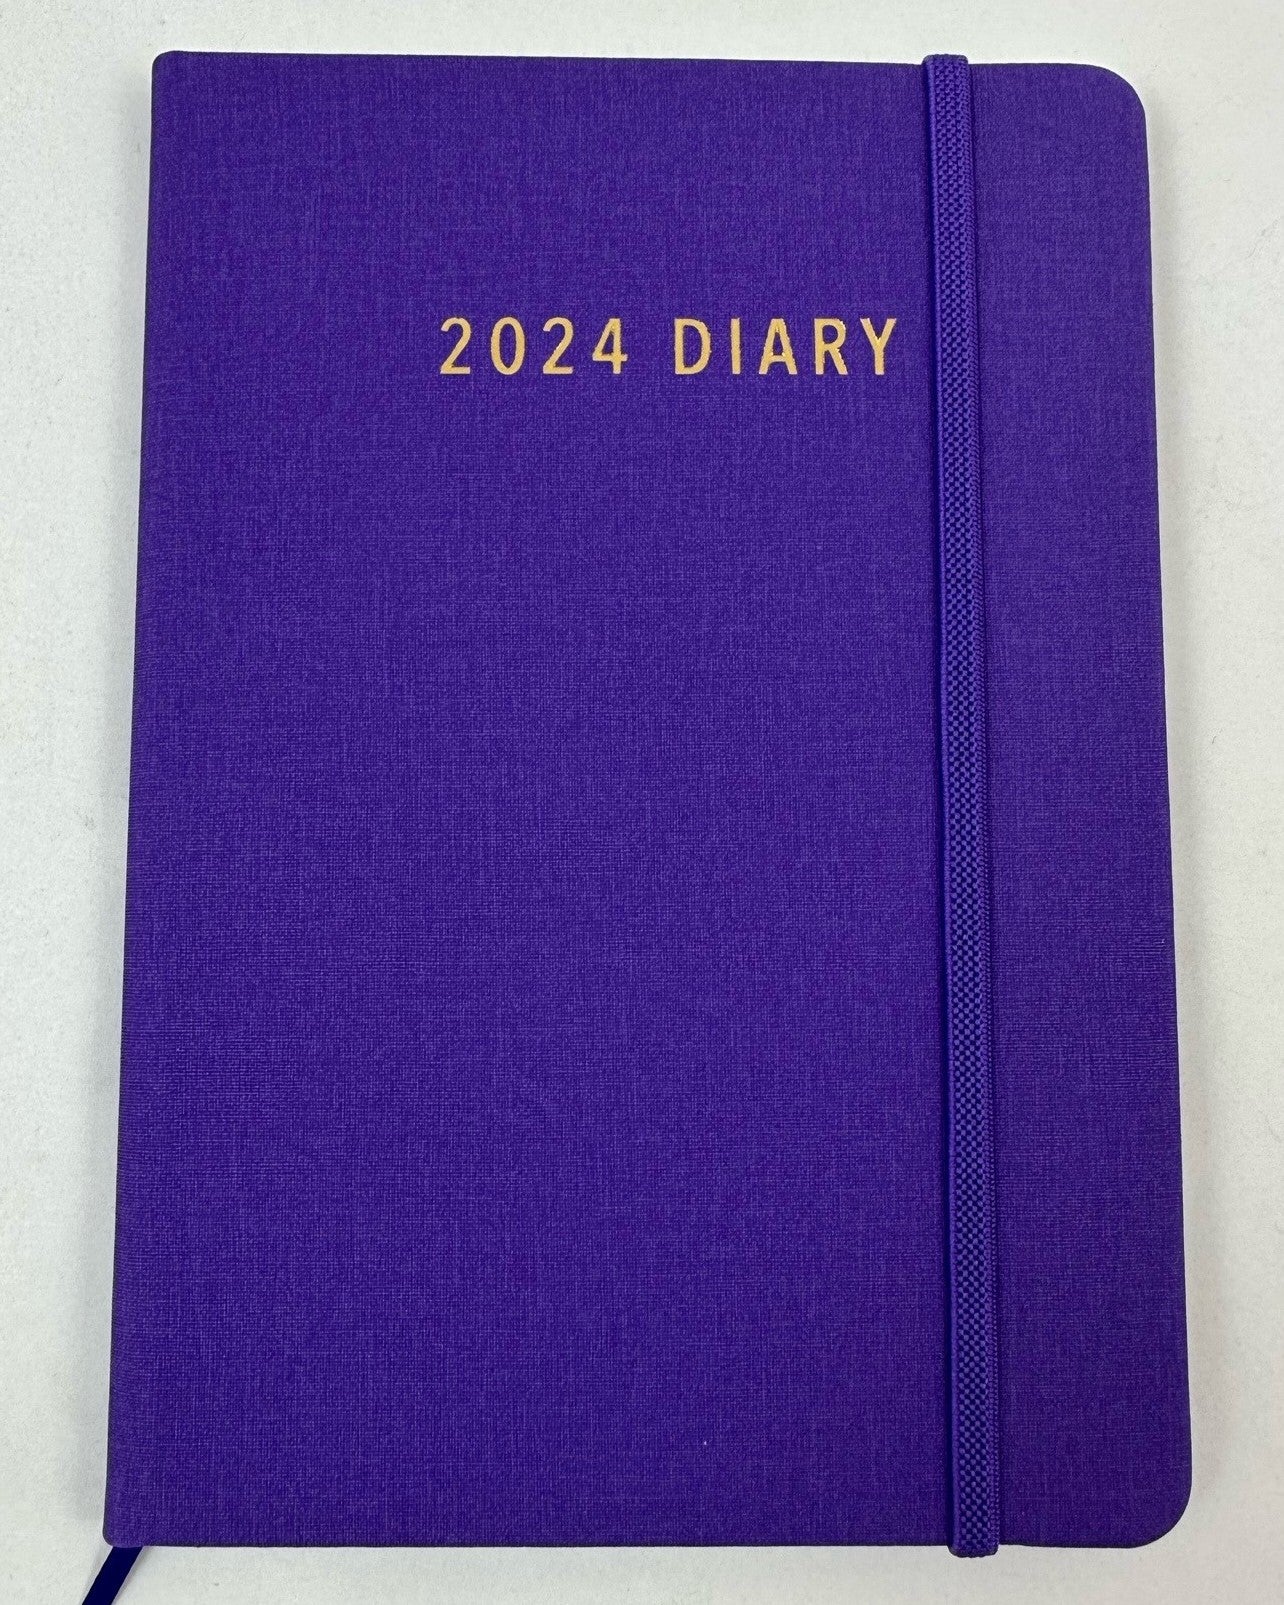 2024 A5 Diary Week to View - Violet 50% OFF